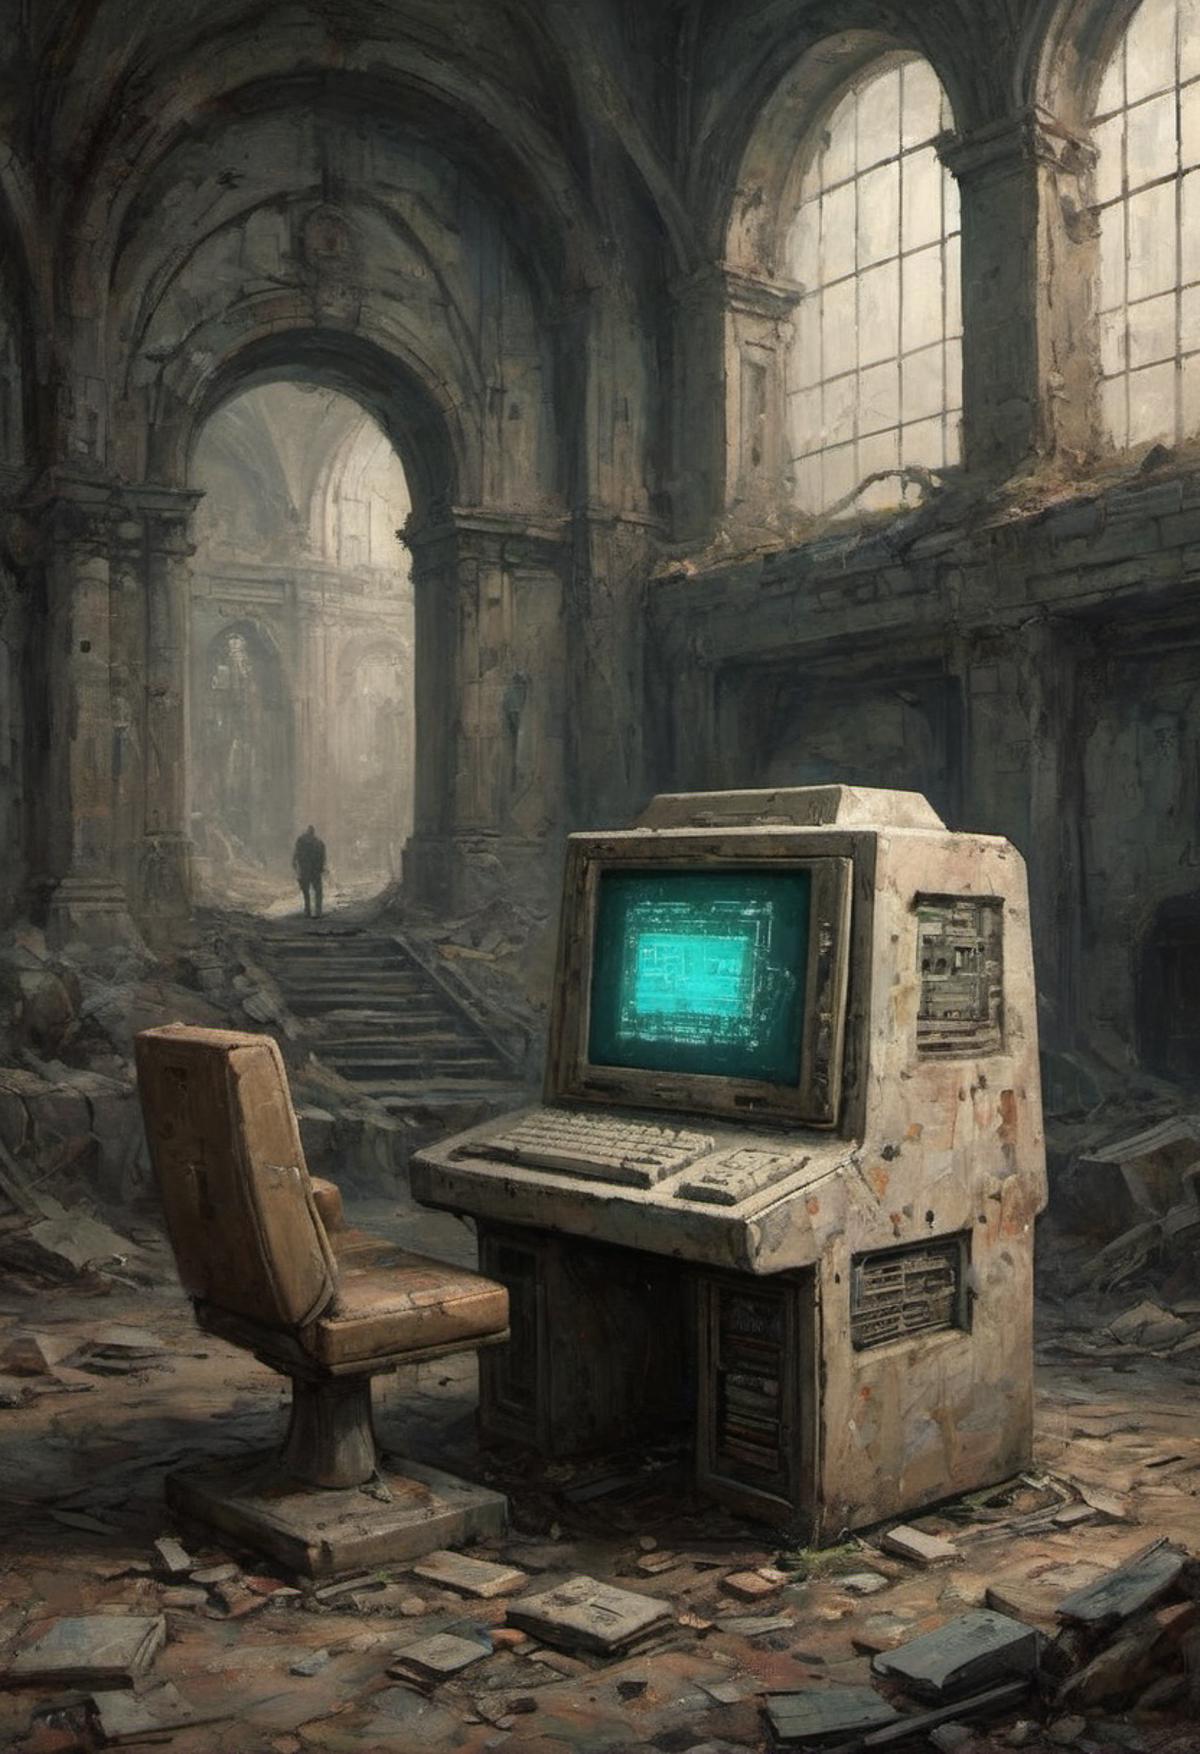 A vintage computer monitor sitting in an old, dilapidated room.